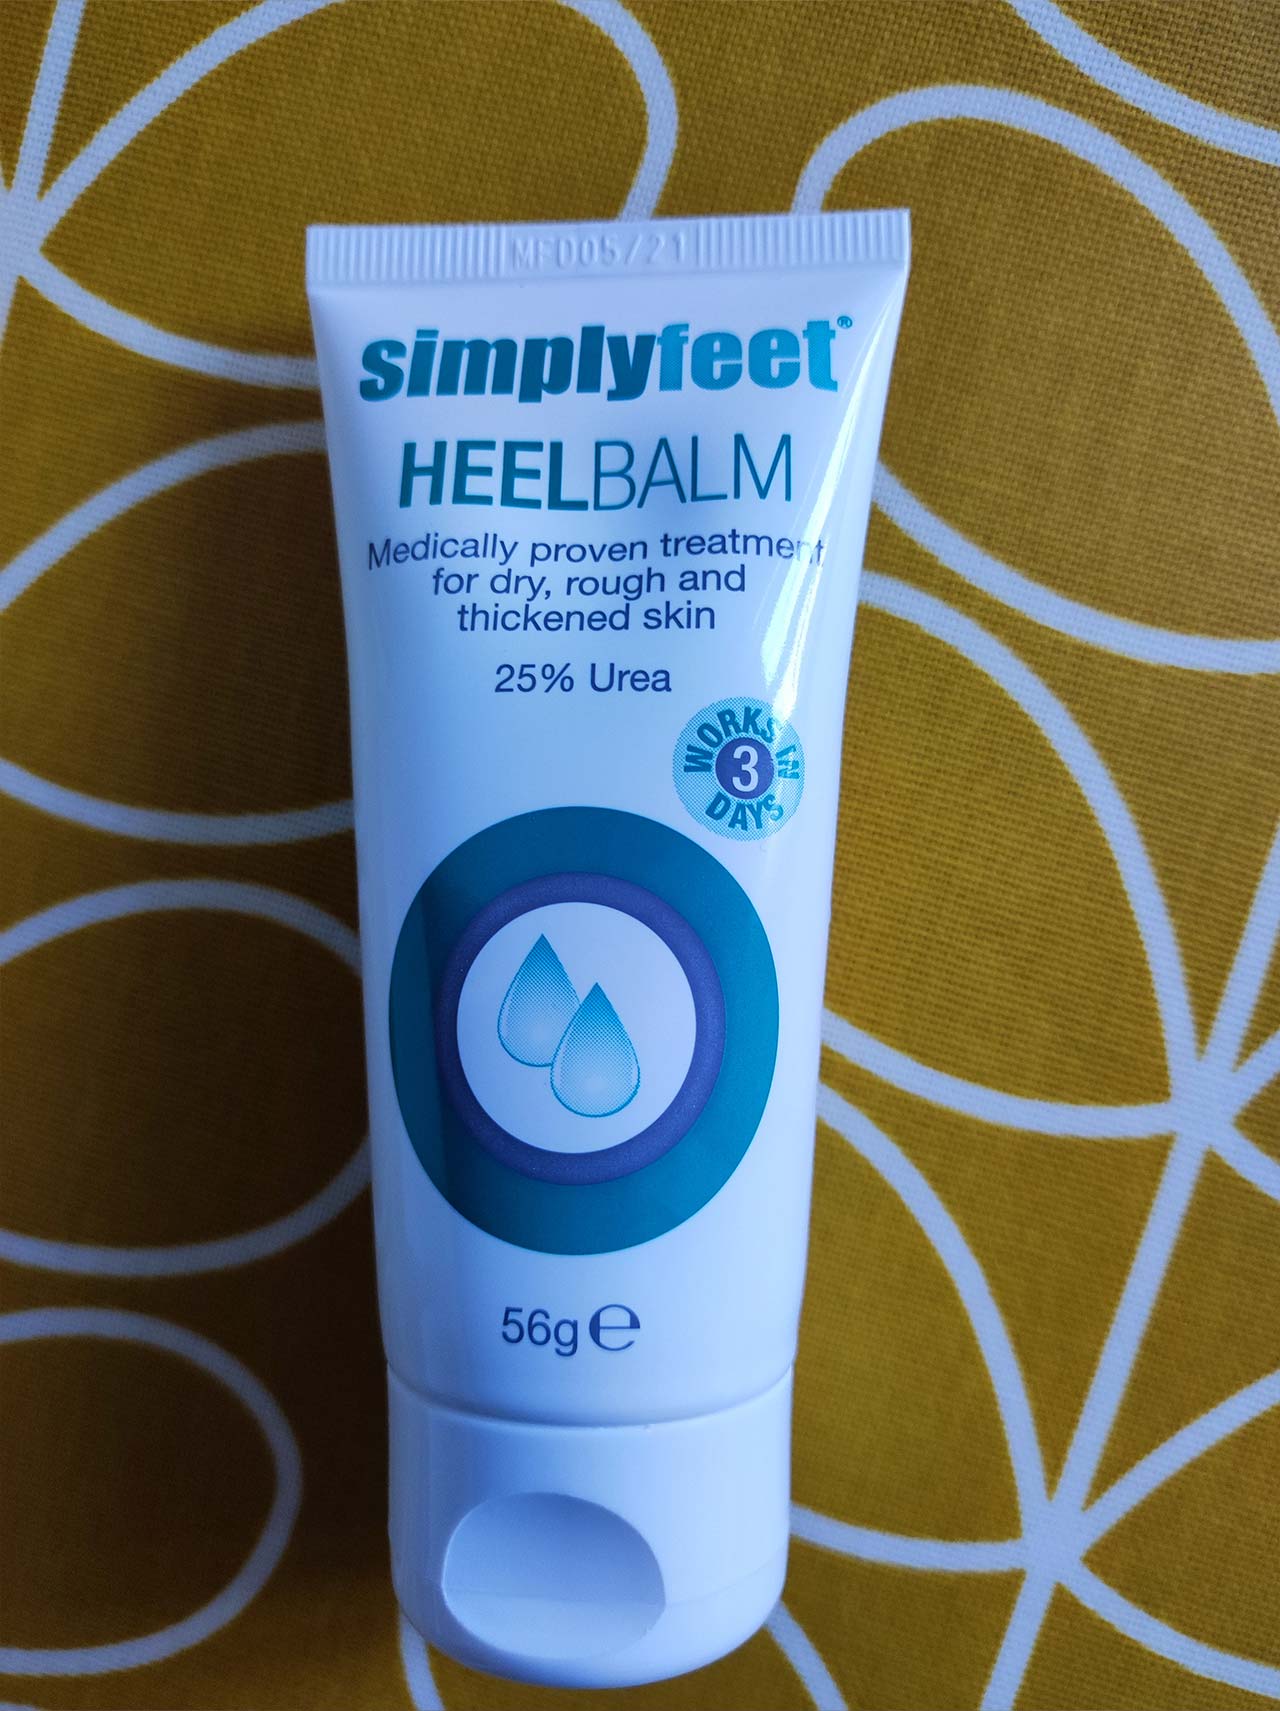 This cream is suitable for diabetic patients. 25% urea cream will restore the natural urea to dry, cracked heels so that healing can take place. Contains 25% urea, the skin’s natural moisturiser, in a rich emollient base and is free from paraben and perfume.